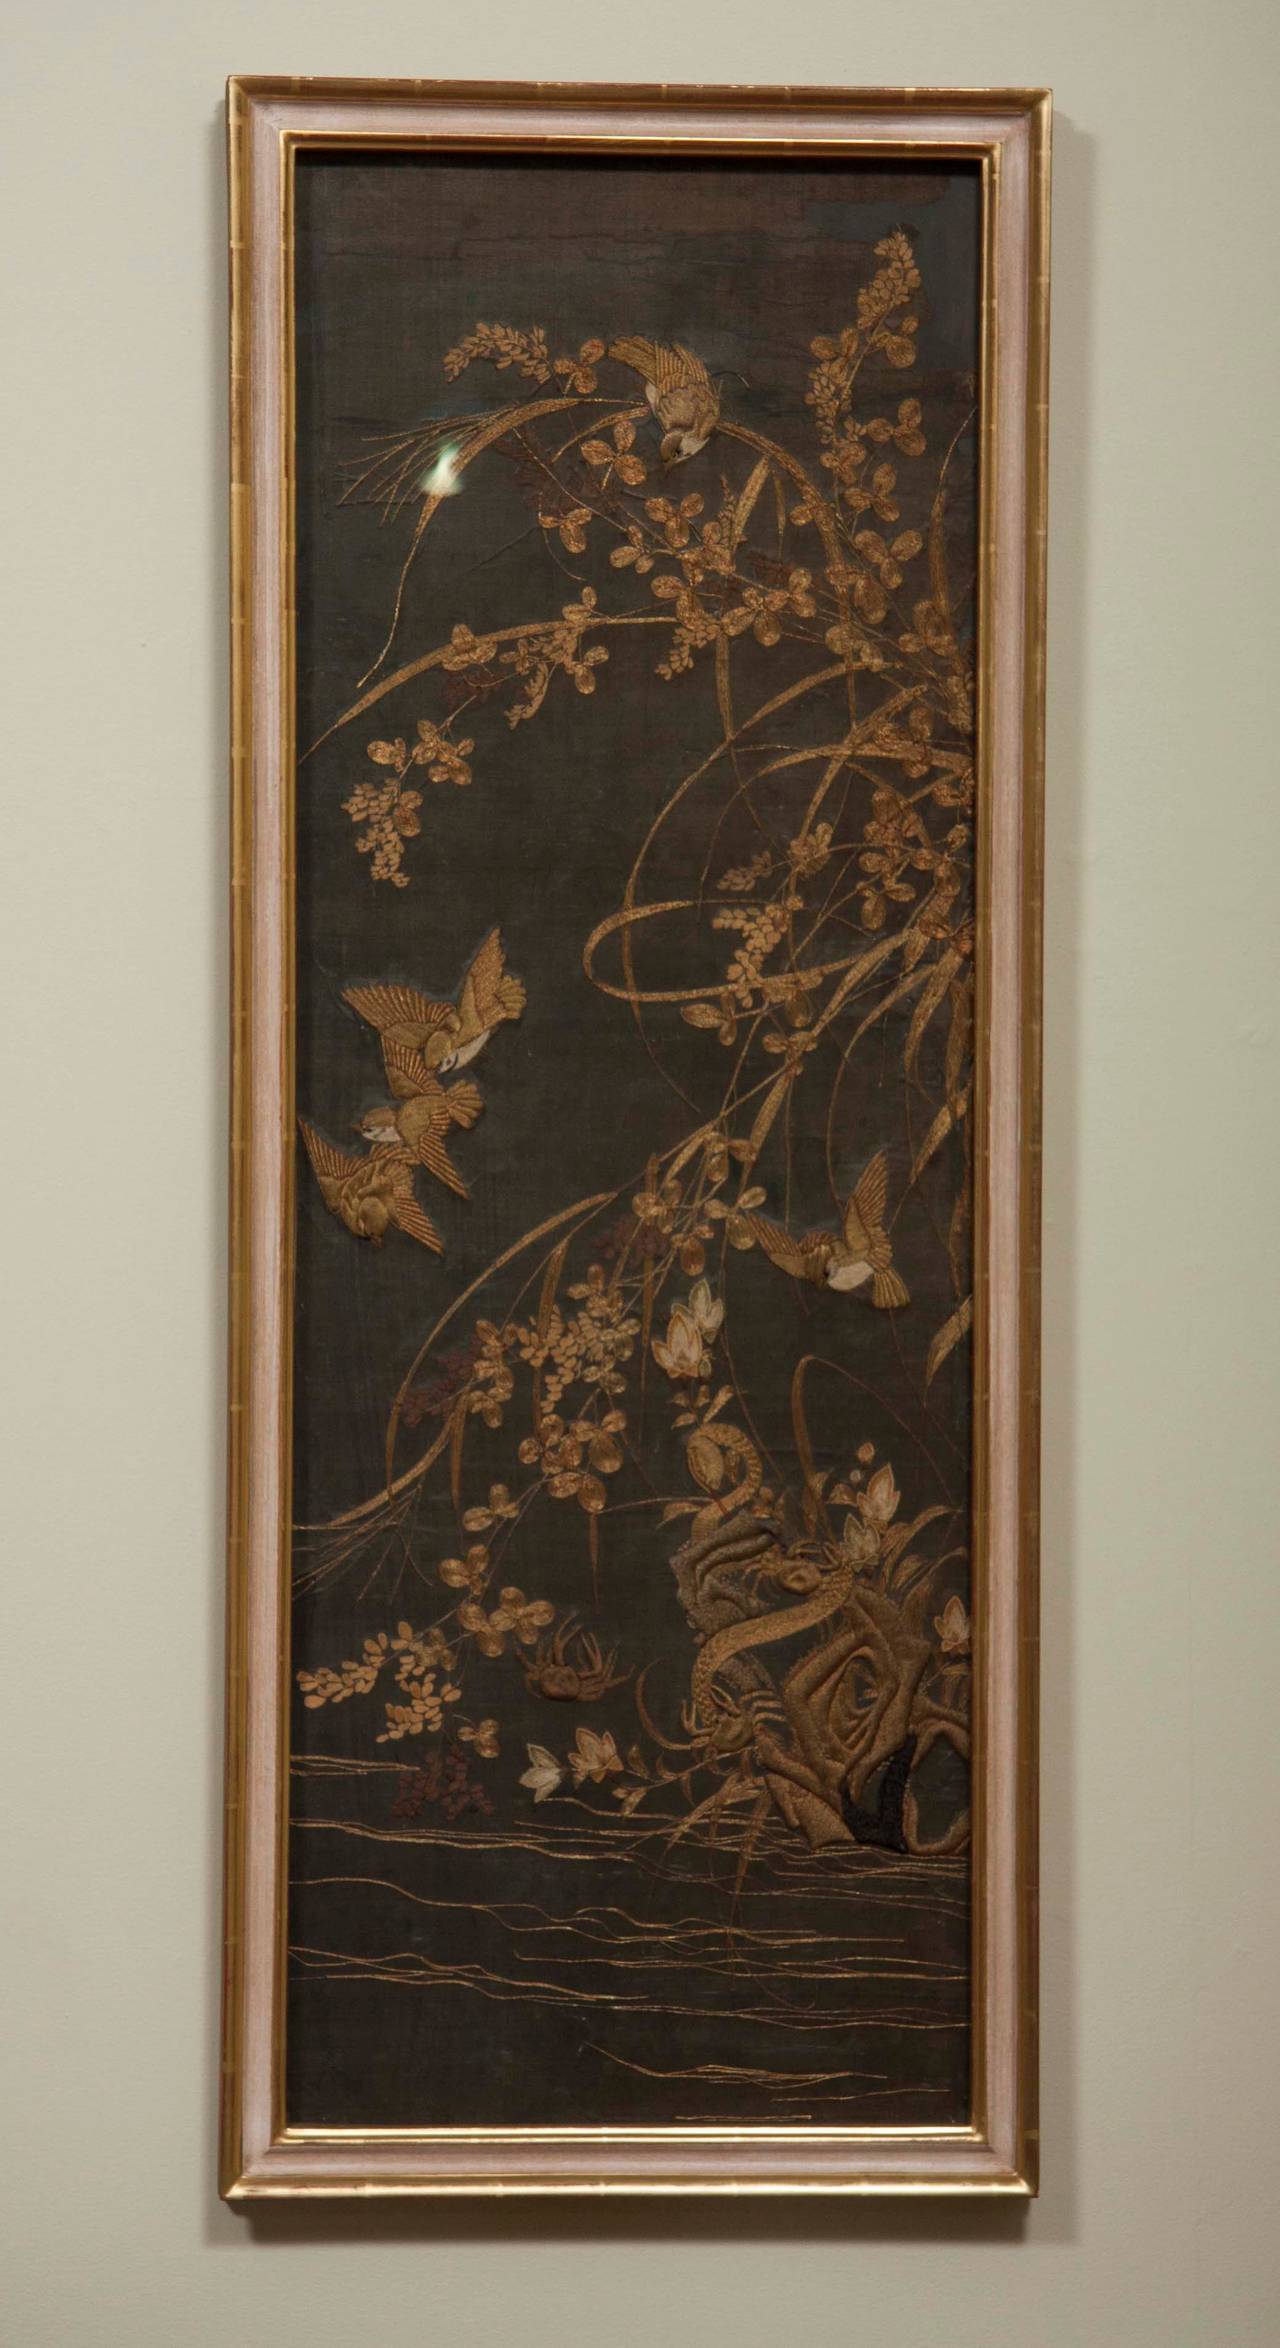 Four framed Japanese embroidered silk panels with metal thread decoration of birds in trees and flowers.